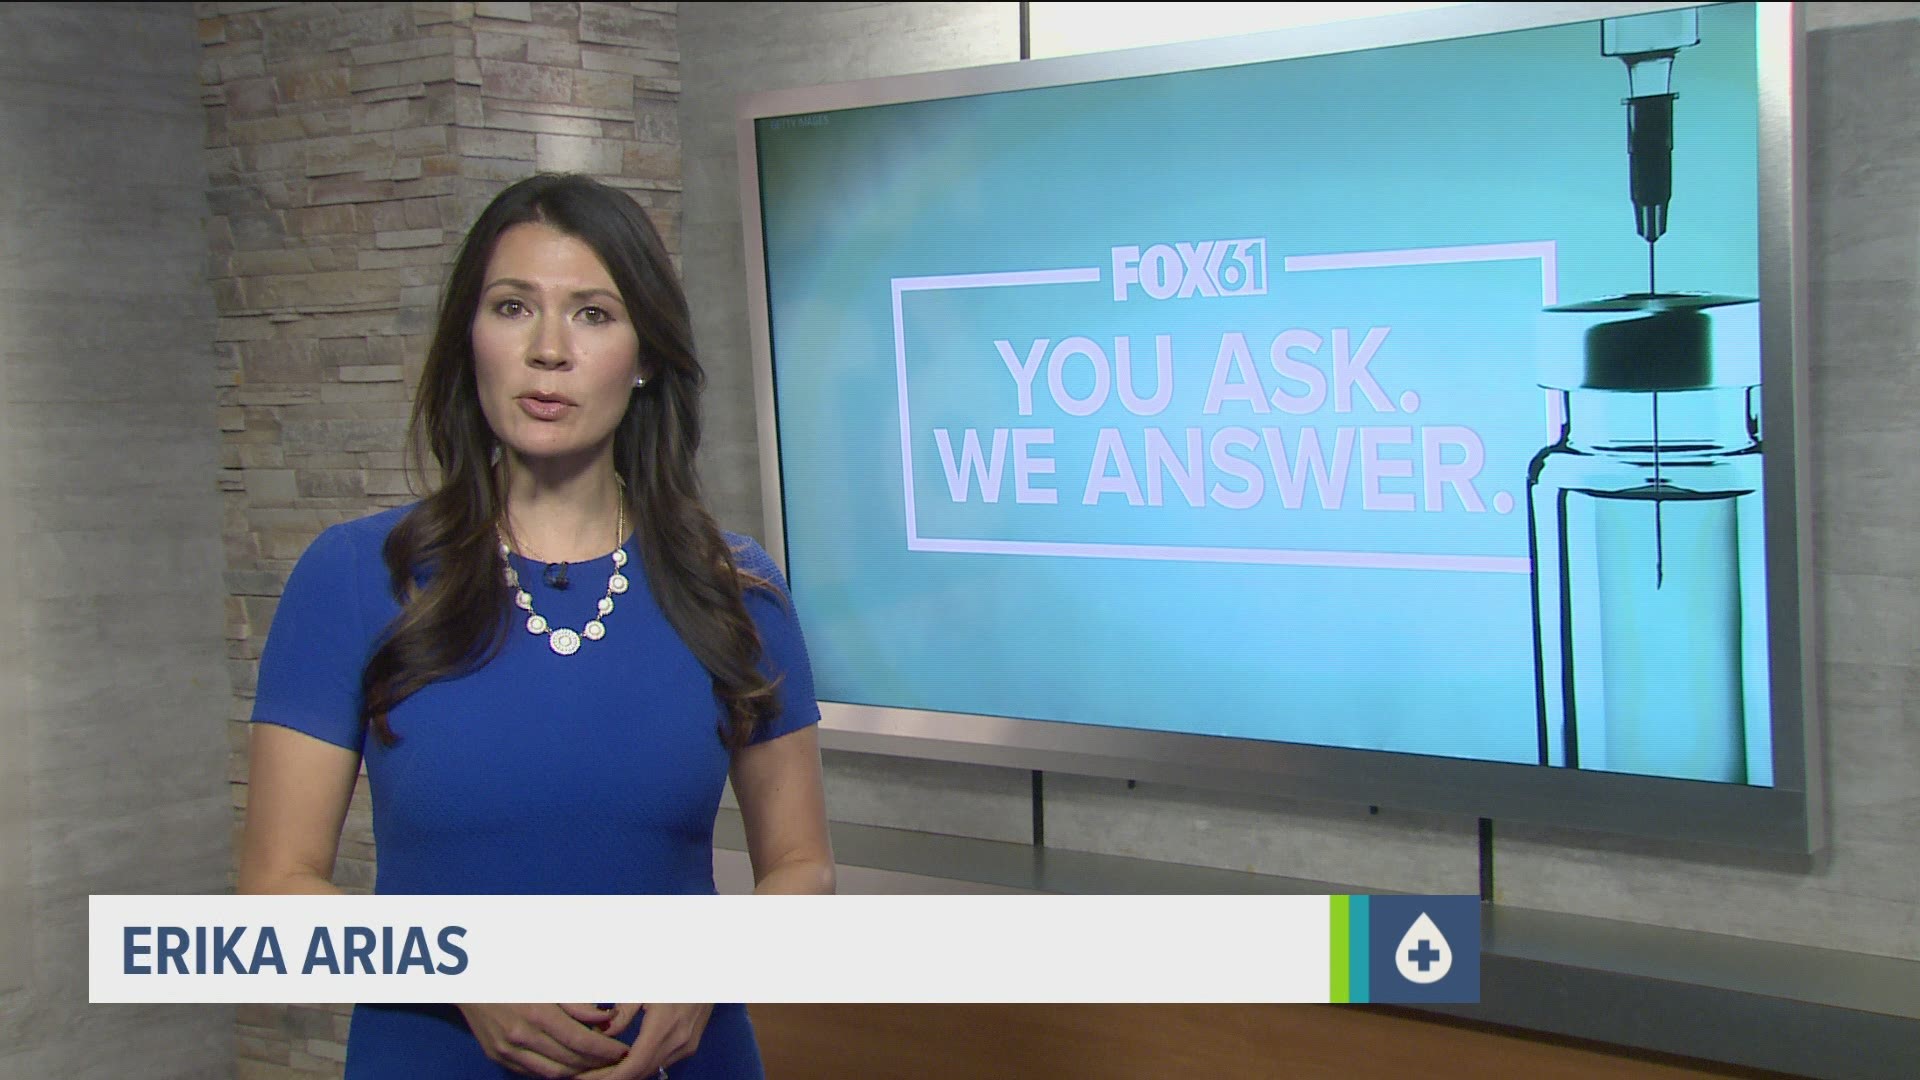 Send your question to share61@fox61.com. We'll air your question and an answer to your question on-air and online.